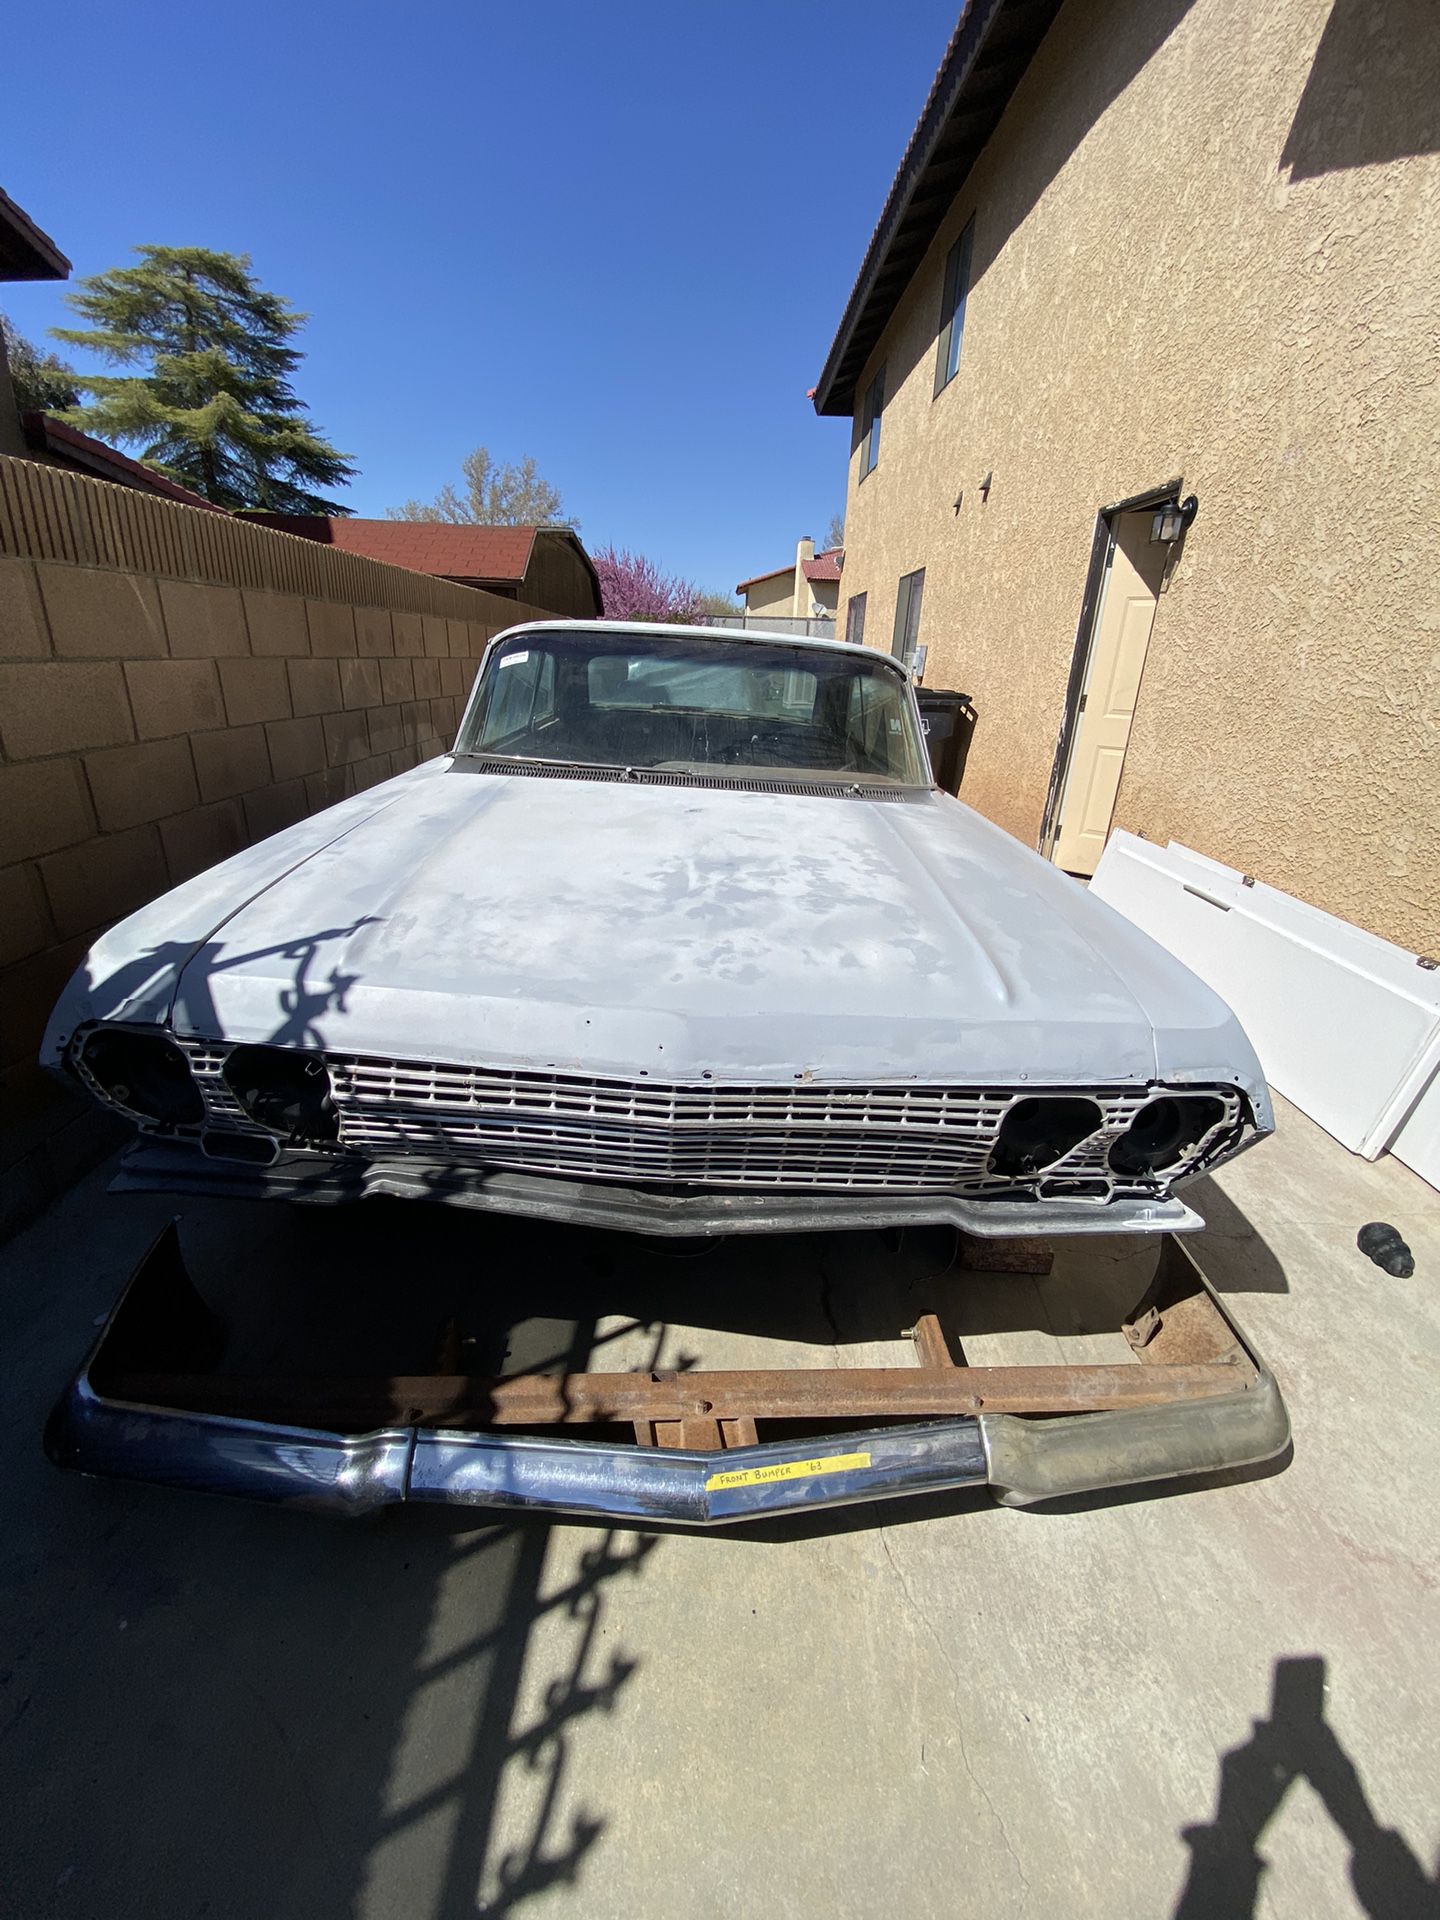 1963 Chevy Impala  In. Lancaster CA, 